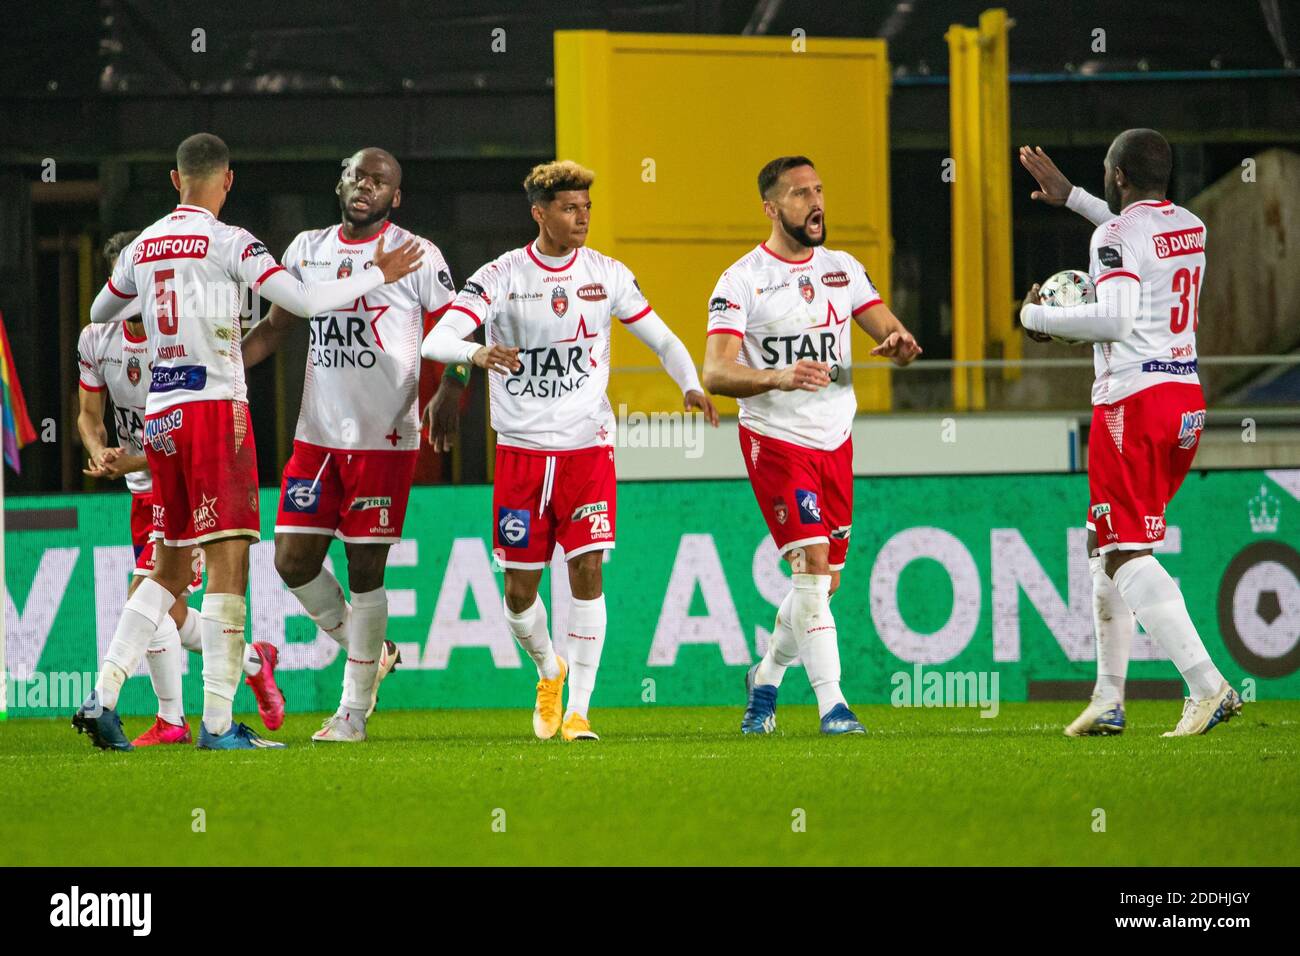 Mouscron's players celebrate after scoring during a postponed soccer match between Cercle Brugge KSV and RE Mouscron, Wednesday 25 November 2020 in Br Stock Photo